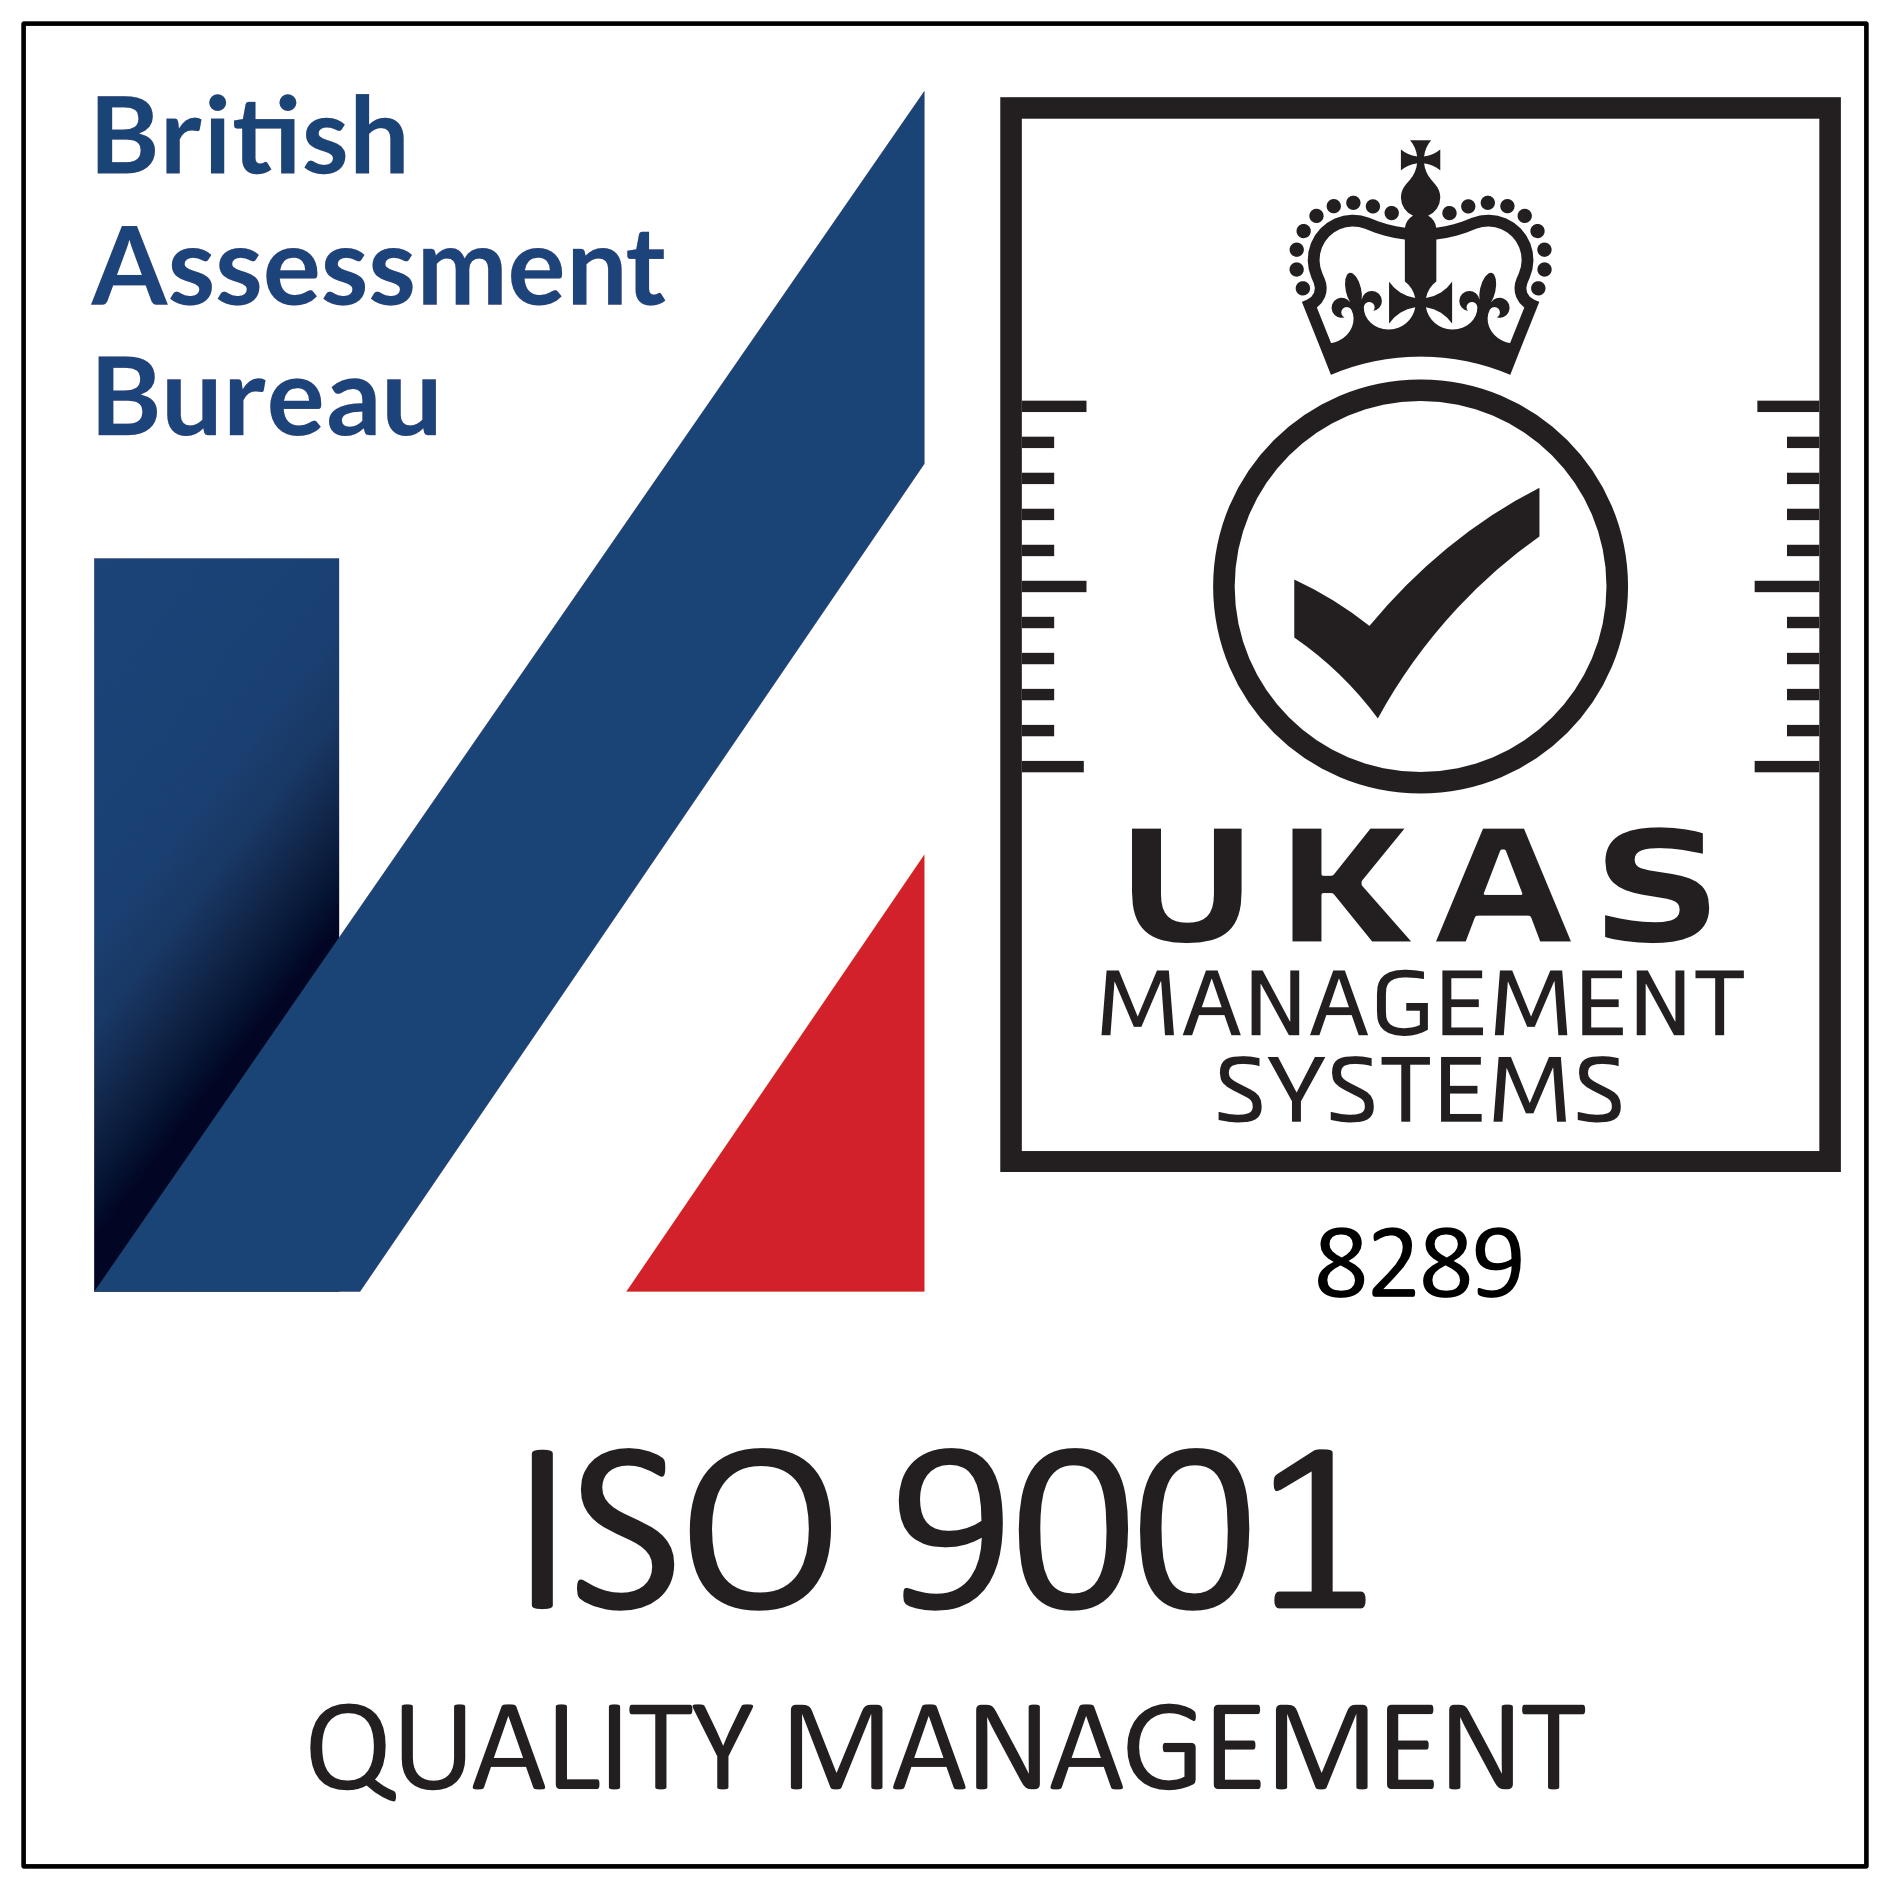 Certified to ISO 9001, the international standard for quality assurance